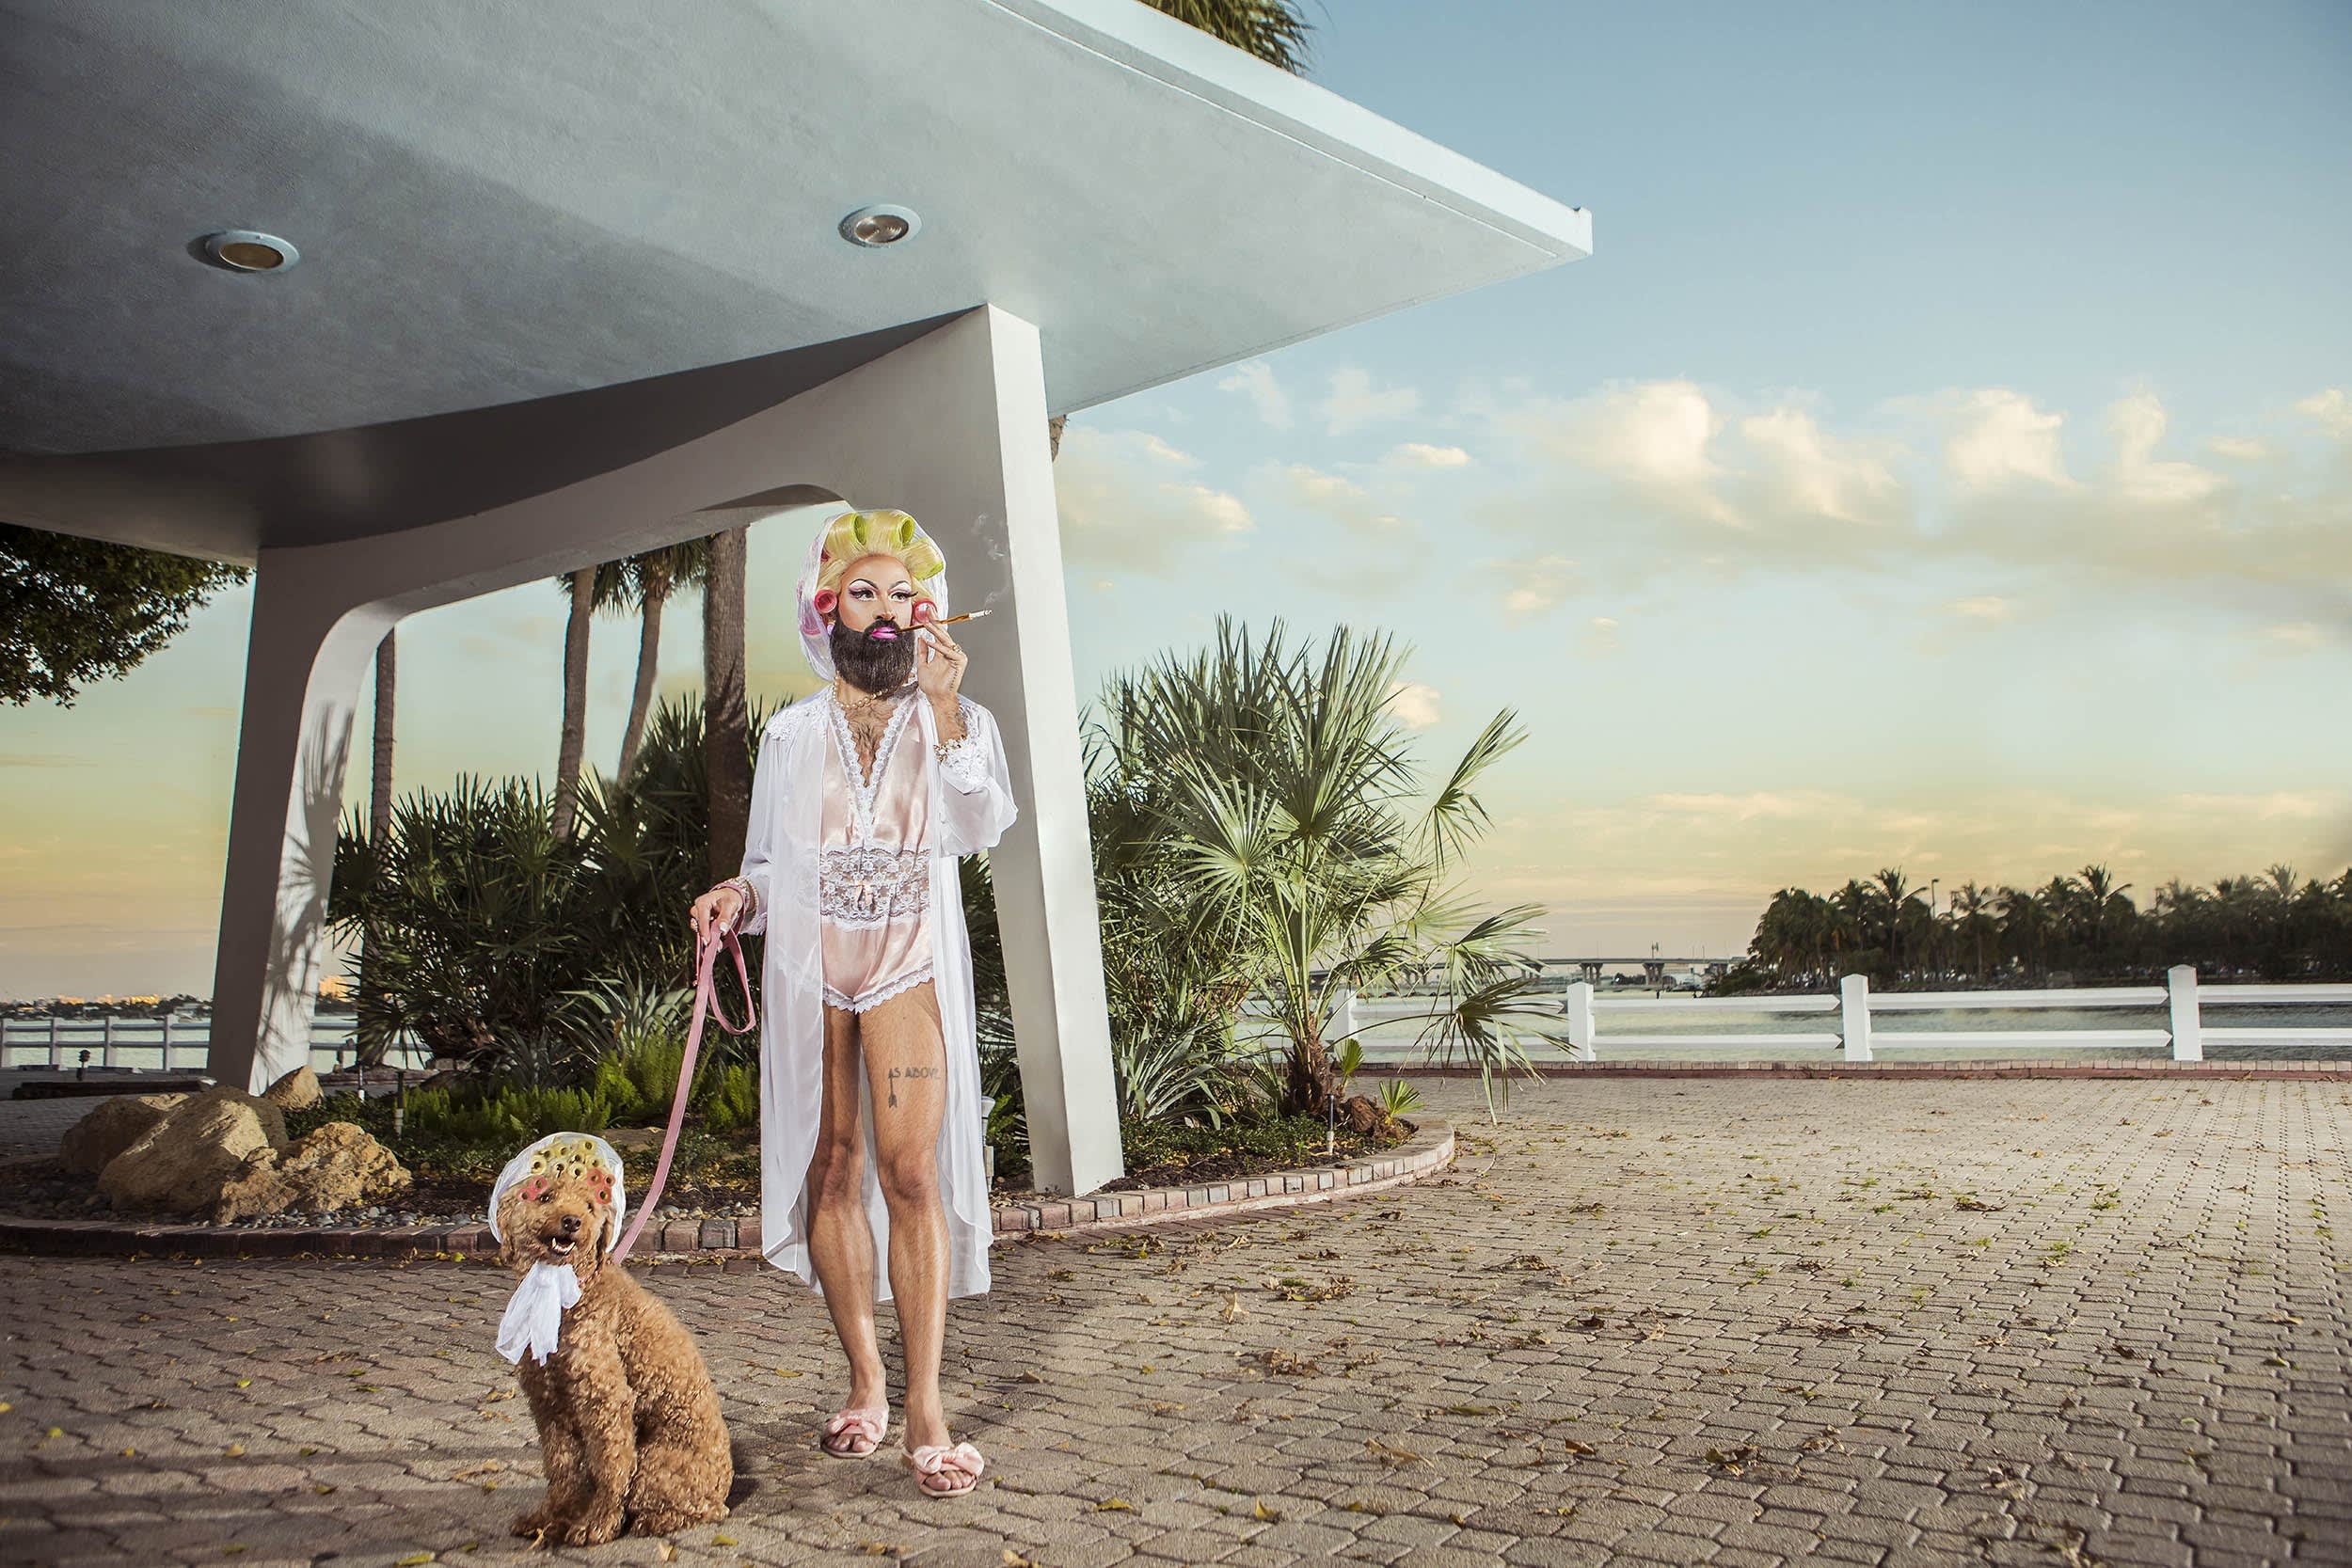 Photo of a man in drag lingerie walking a dog